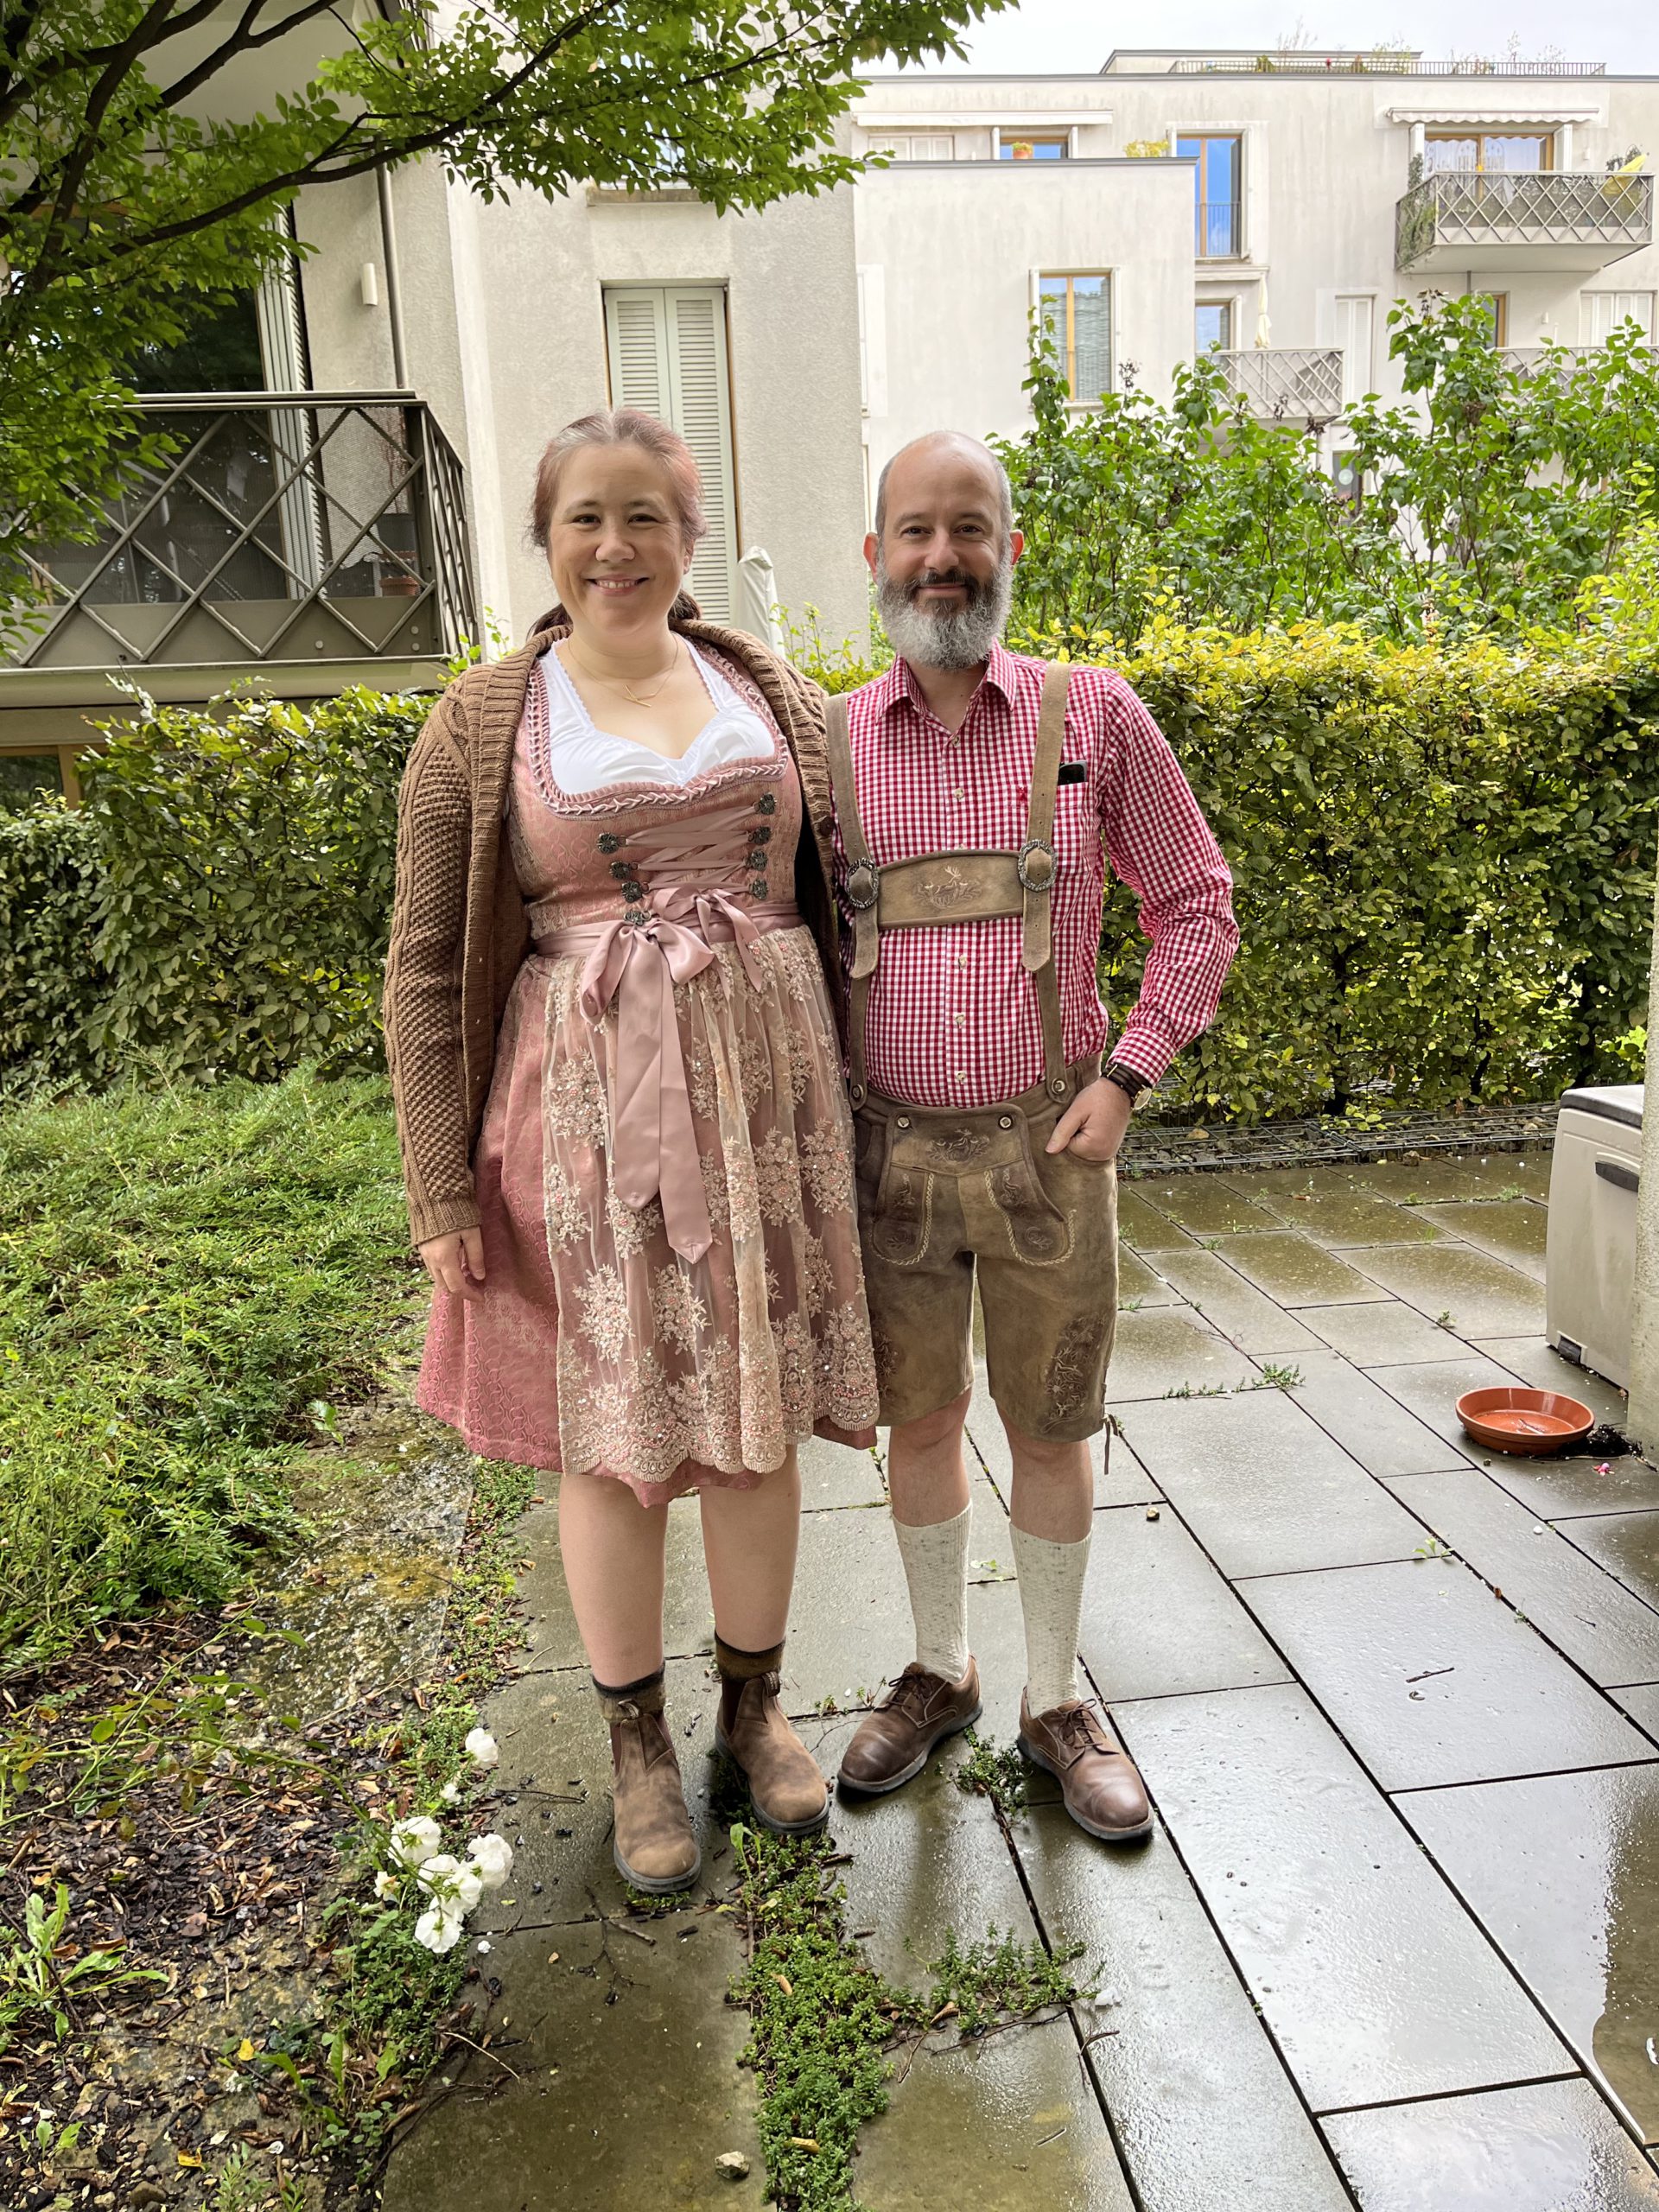 Me and Rodd in our Tracht